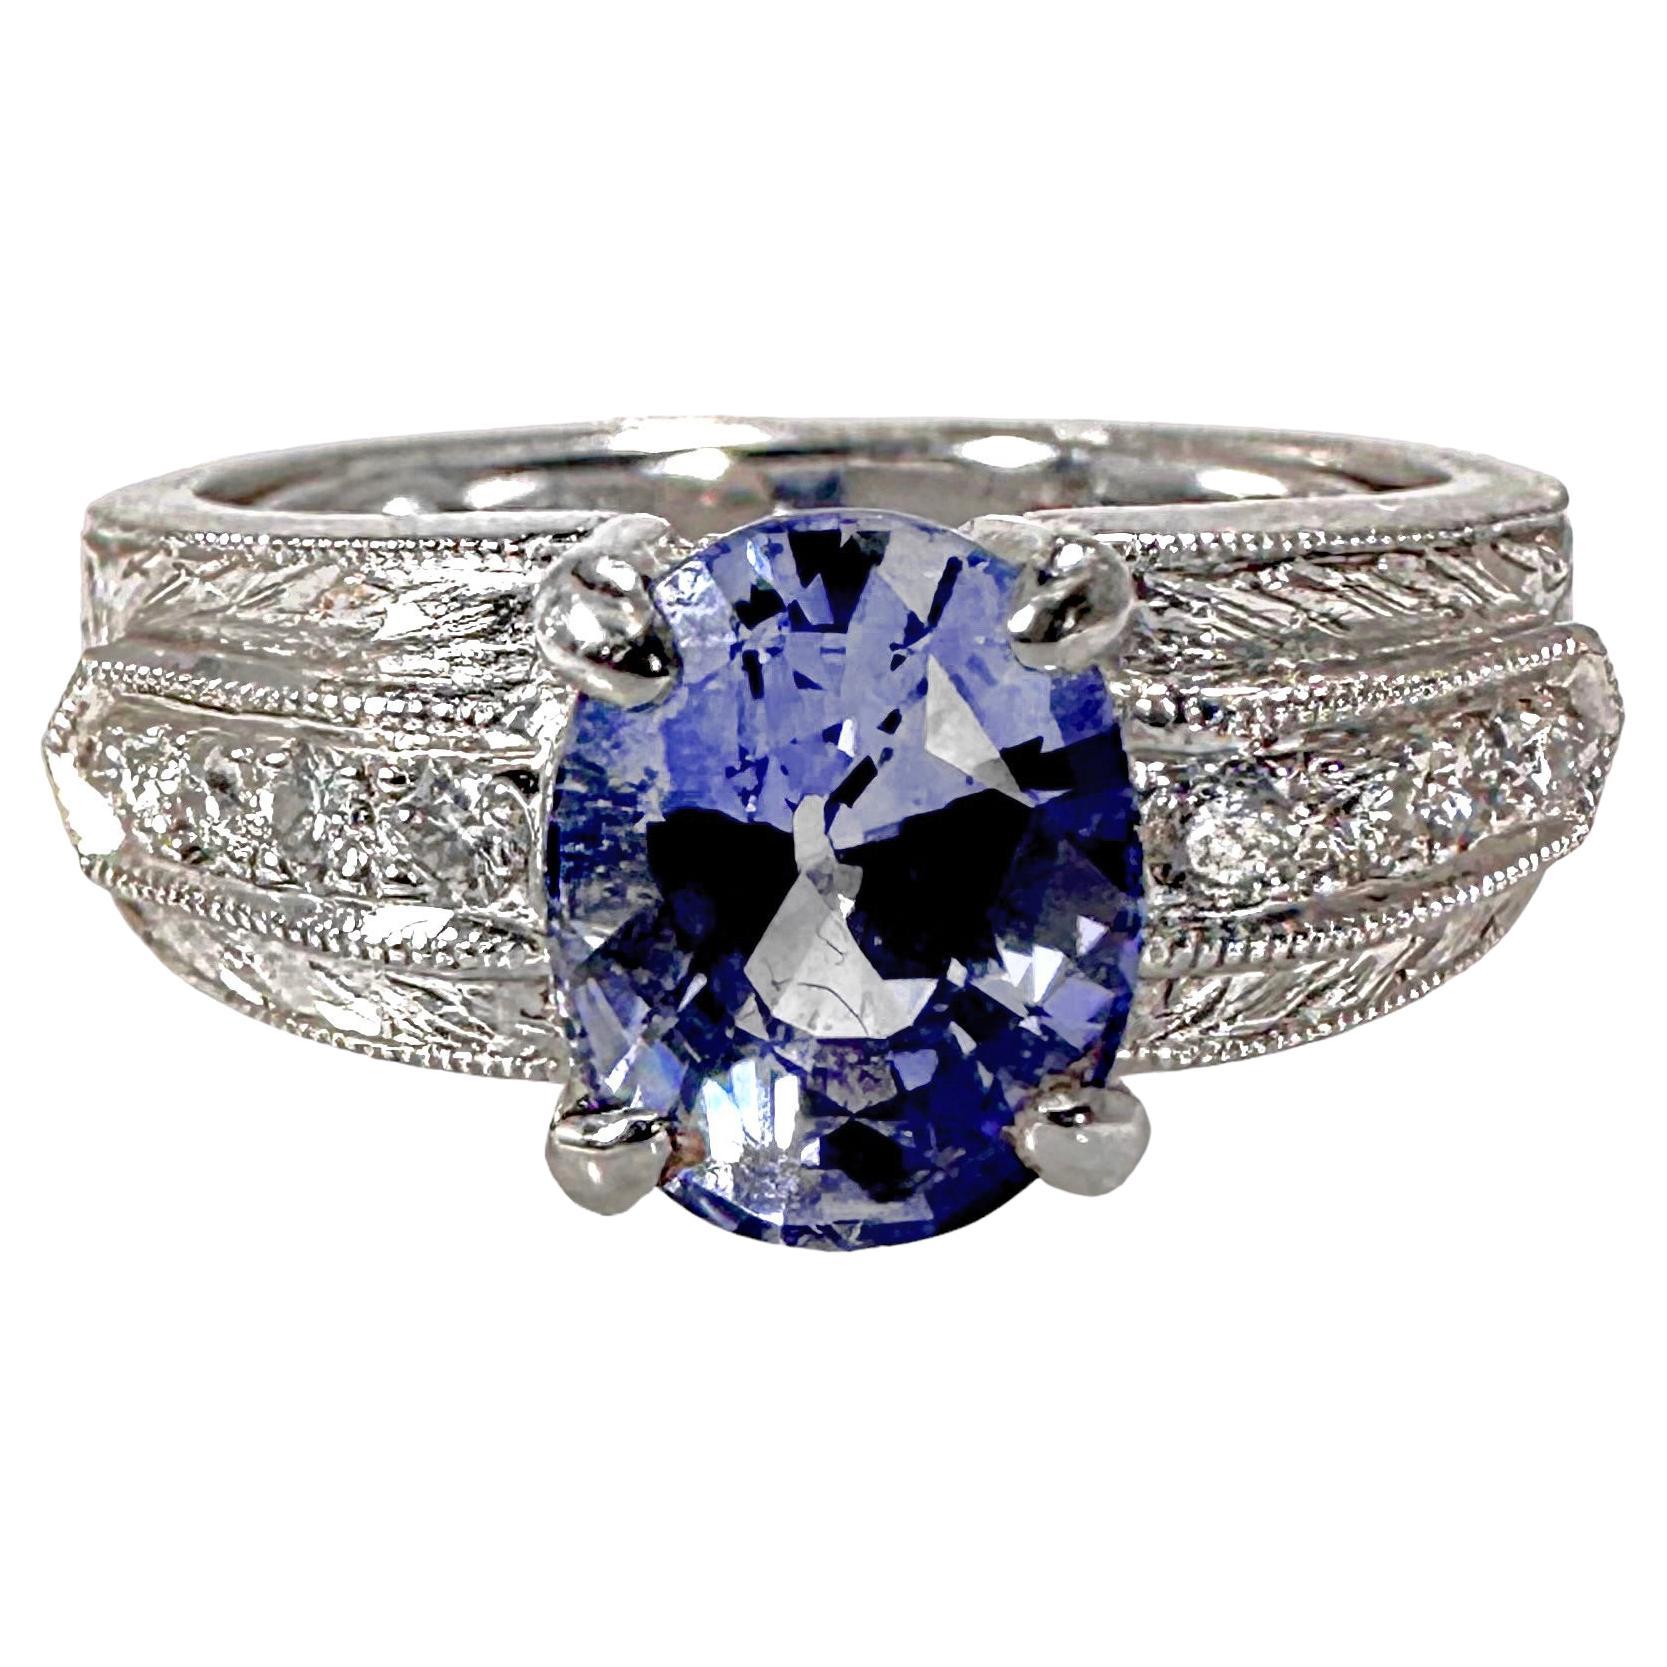 Mid-20th Century Hand Engraved Platinum, Sapphire, and Diamond Cocktail Ring For Sale